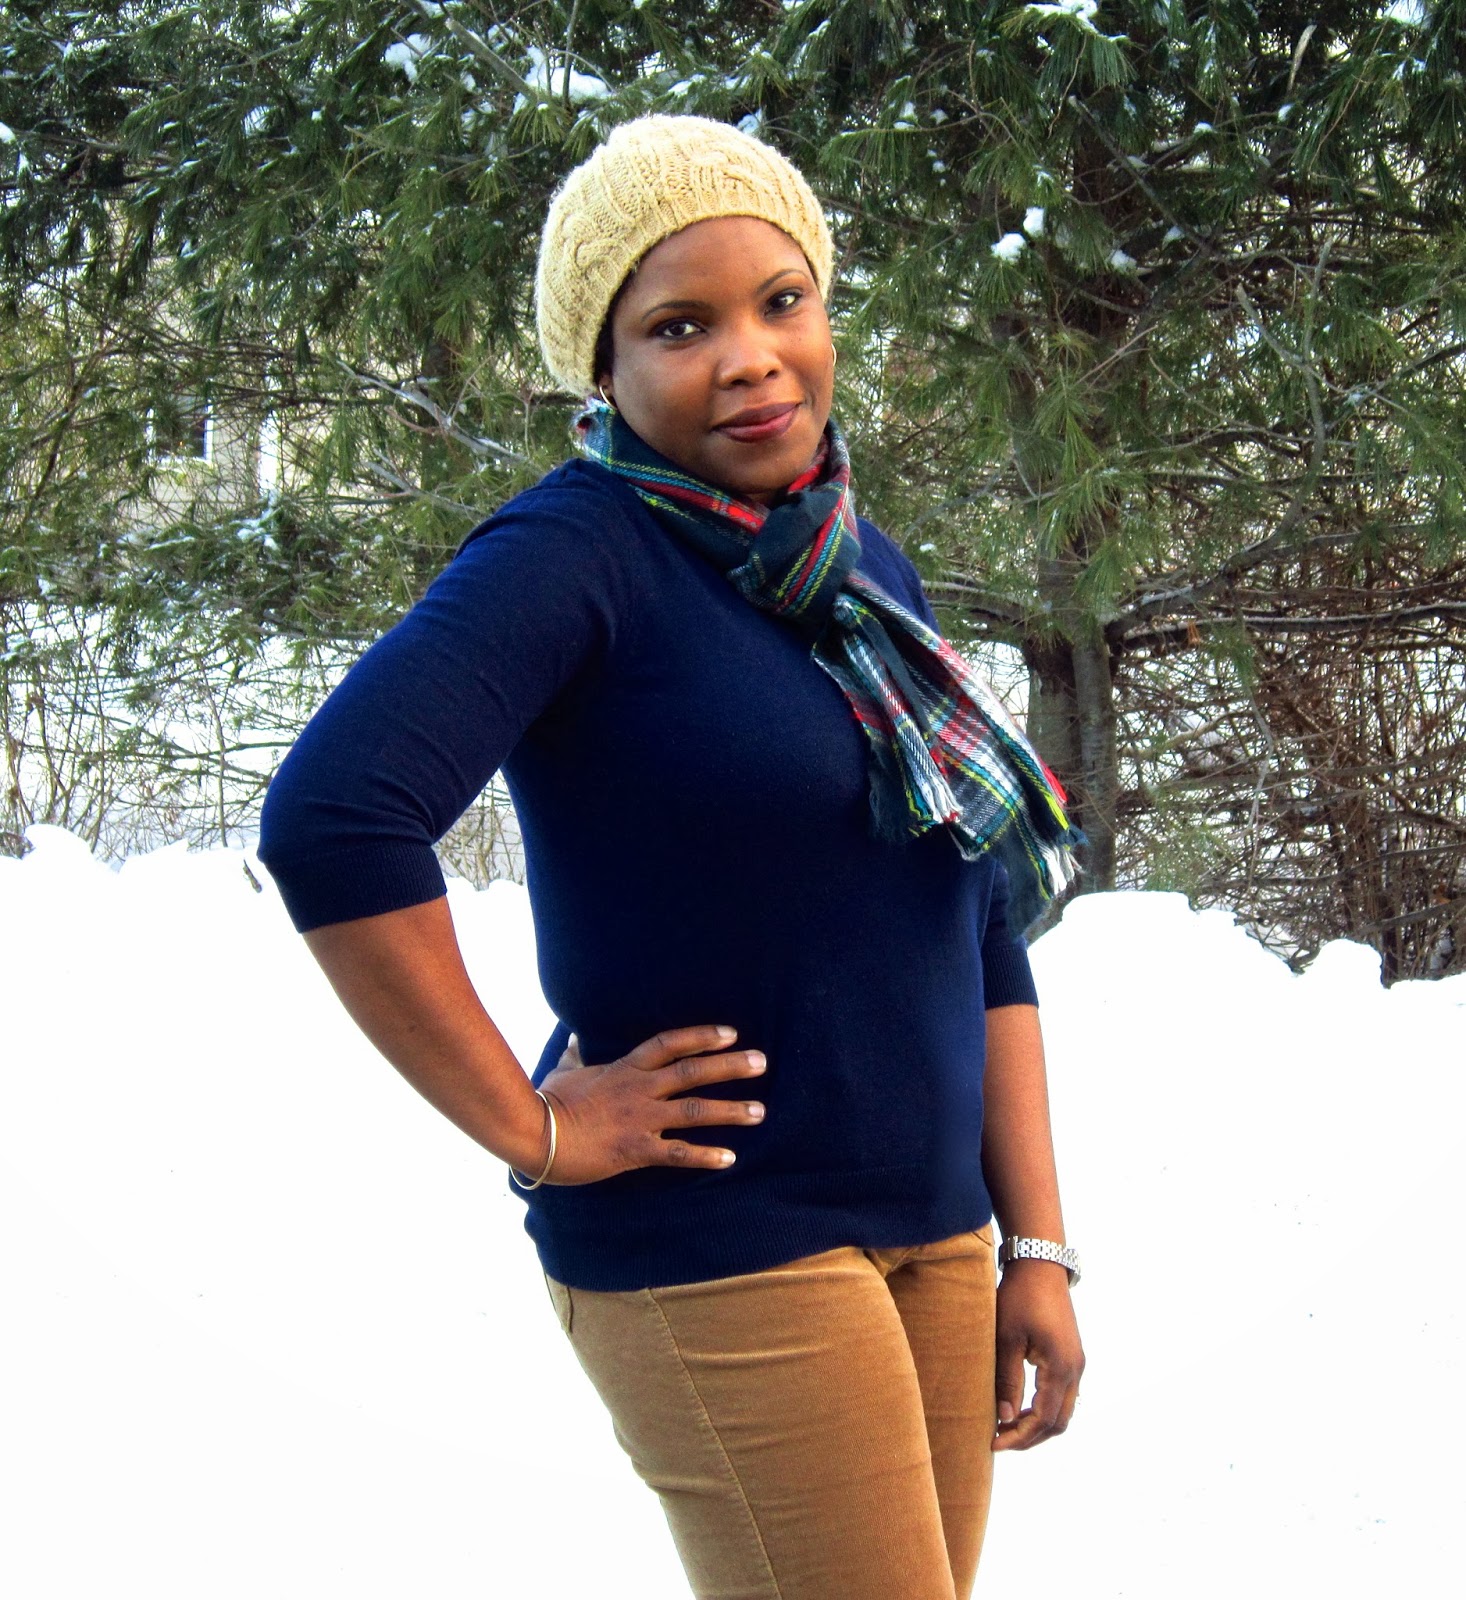 Brown with Navy, Knit hat, Plaid Scarf